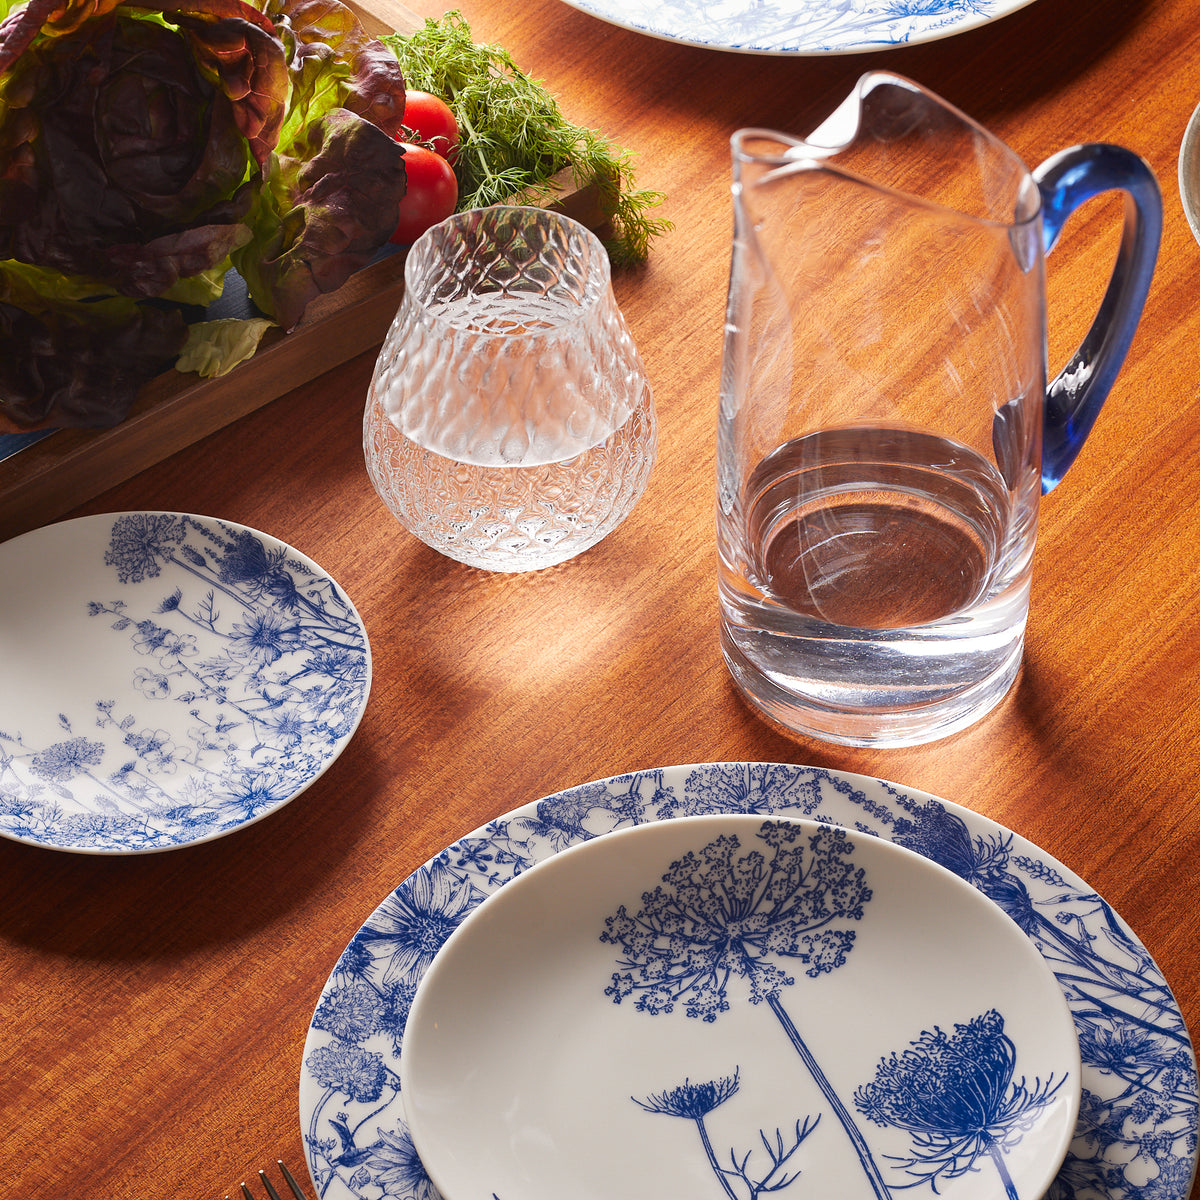 An elegant Les Nuages Blue Handle Small Pitcher by Caskata on a wooden table.